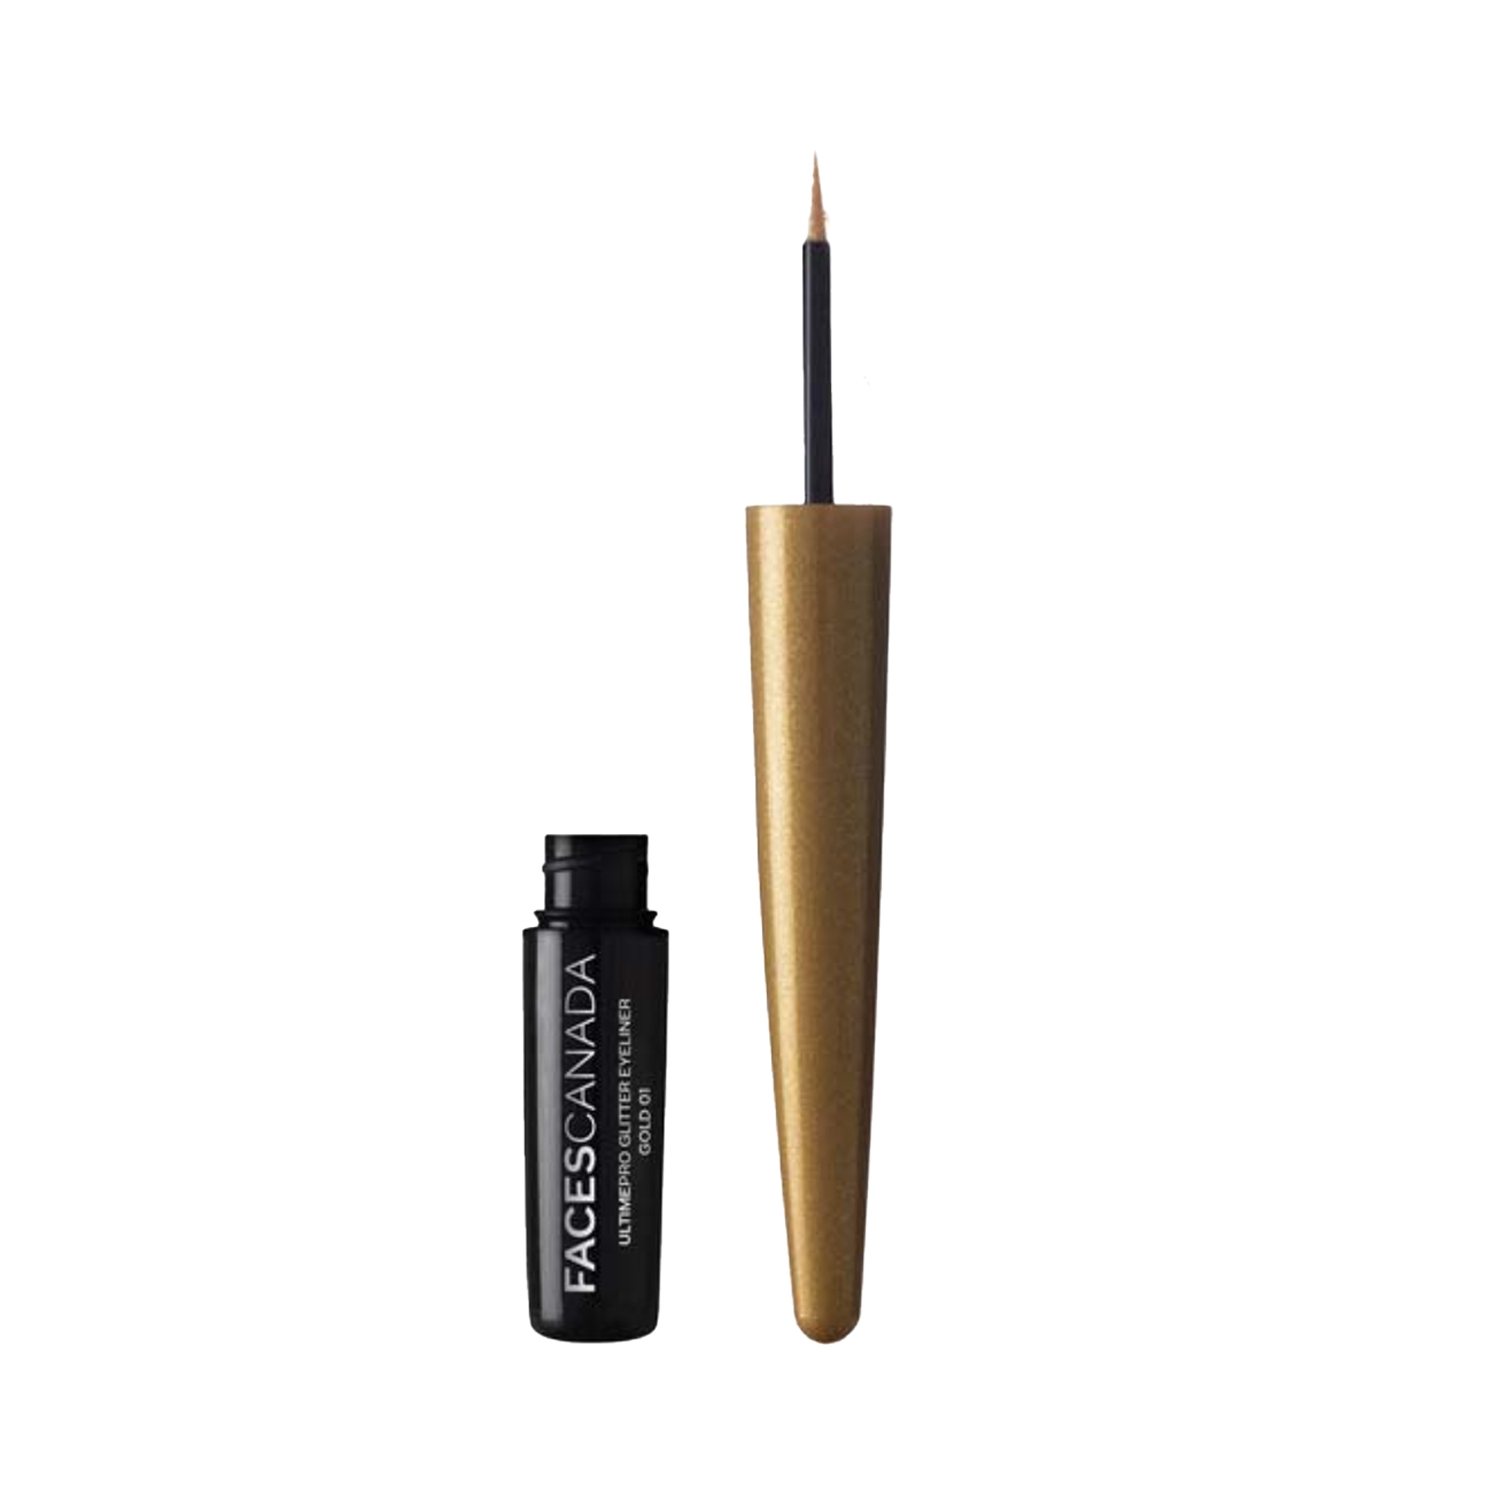 Faces Canada Ultime Pro Glitter Eyeliner - 01 Gold (1.7ml)